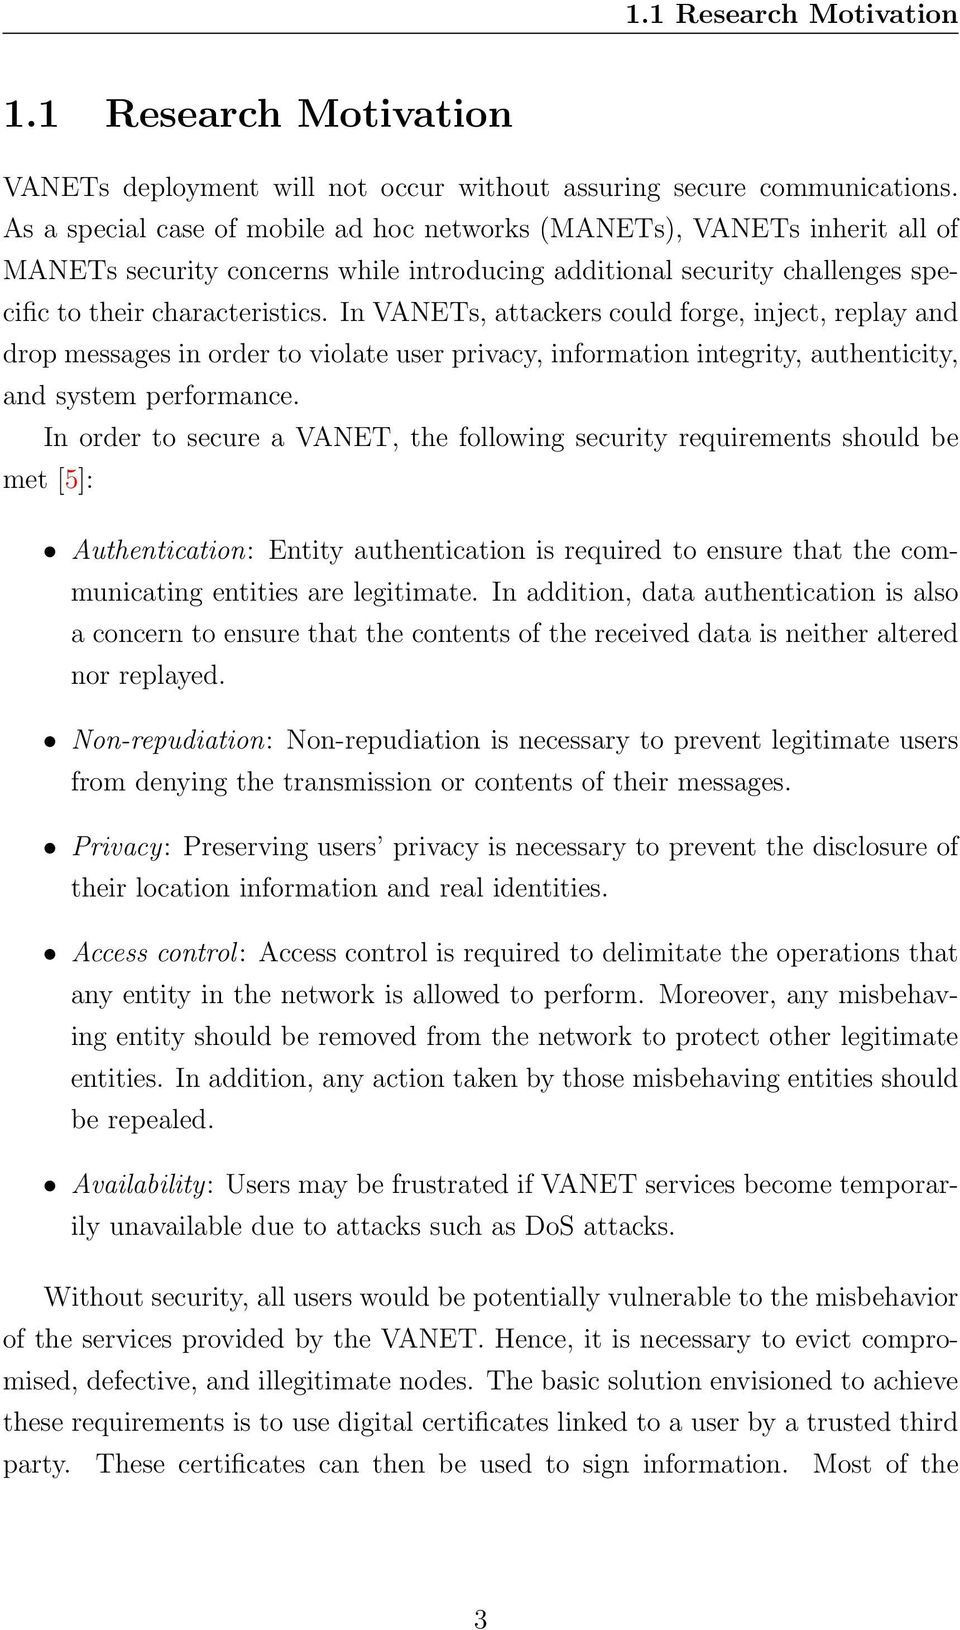 In VANETs, attackers could forge, inject, replay and drop messages in order to violate user privacy, information integrity, authenticity, and system performance.